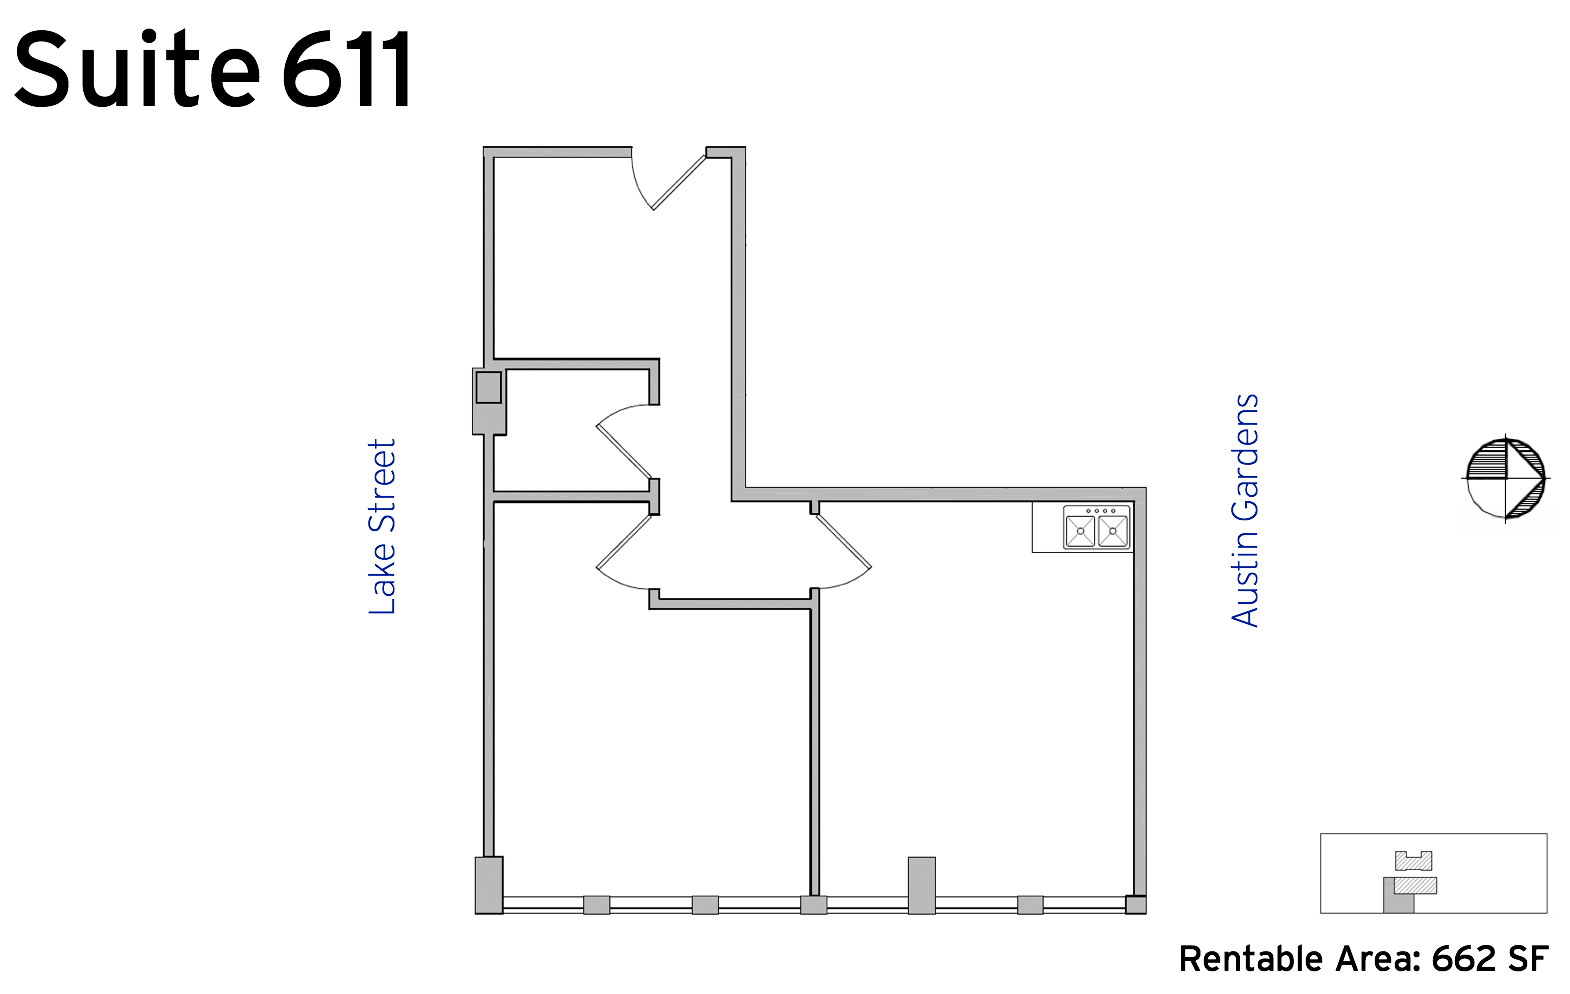 Suite 611 - 1010 Lake Street available office space floor plan